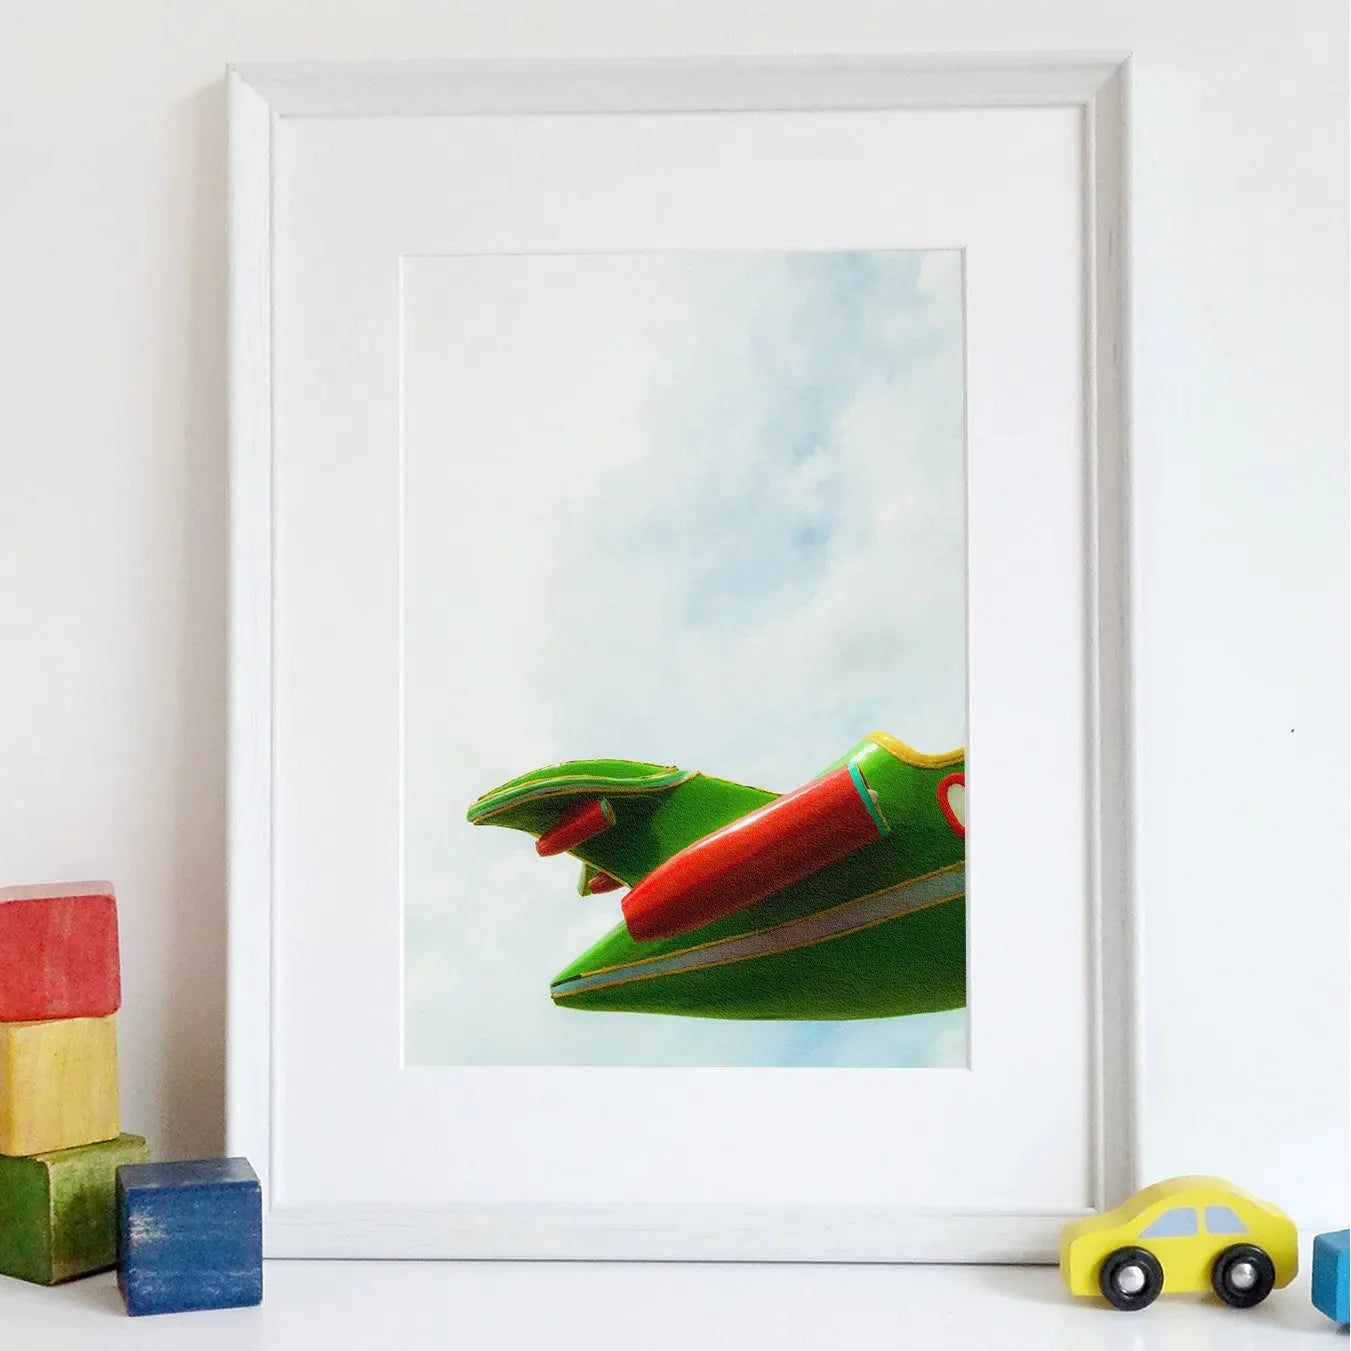 Up In The Air Giclée Print - 12×16 - Posters Prints & Visual Artwork - Aesthetic Art